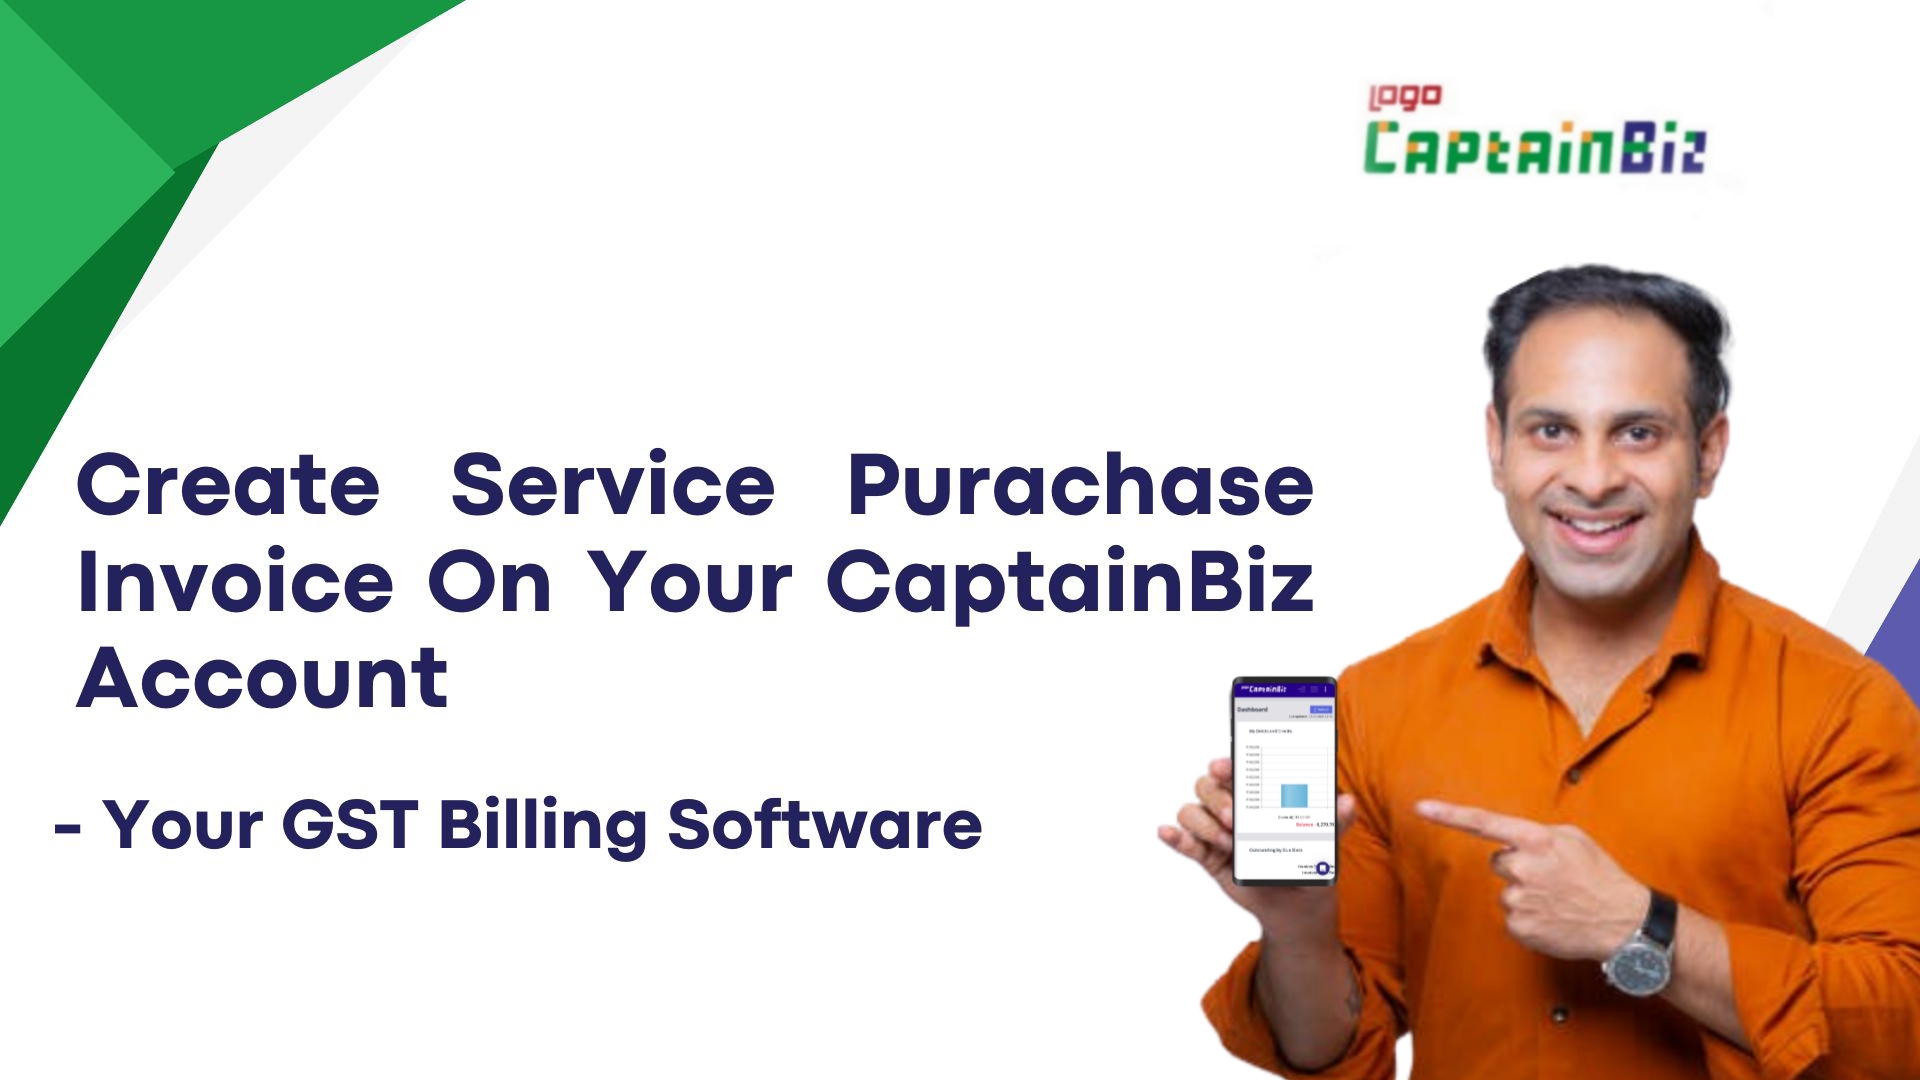 Adding Service Purchase Invoice To Your CaptainBiz Account